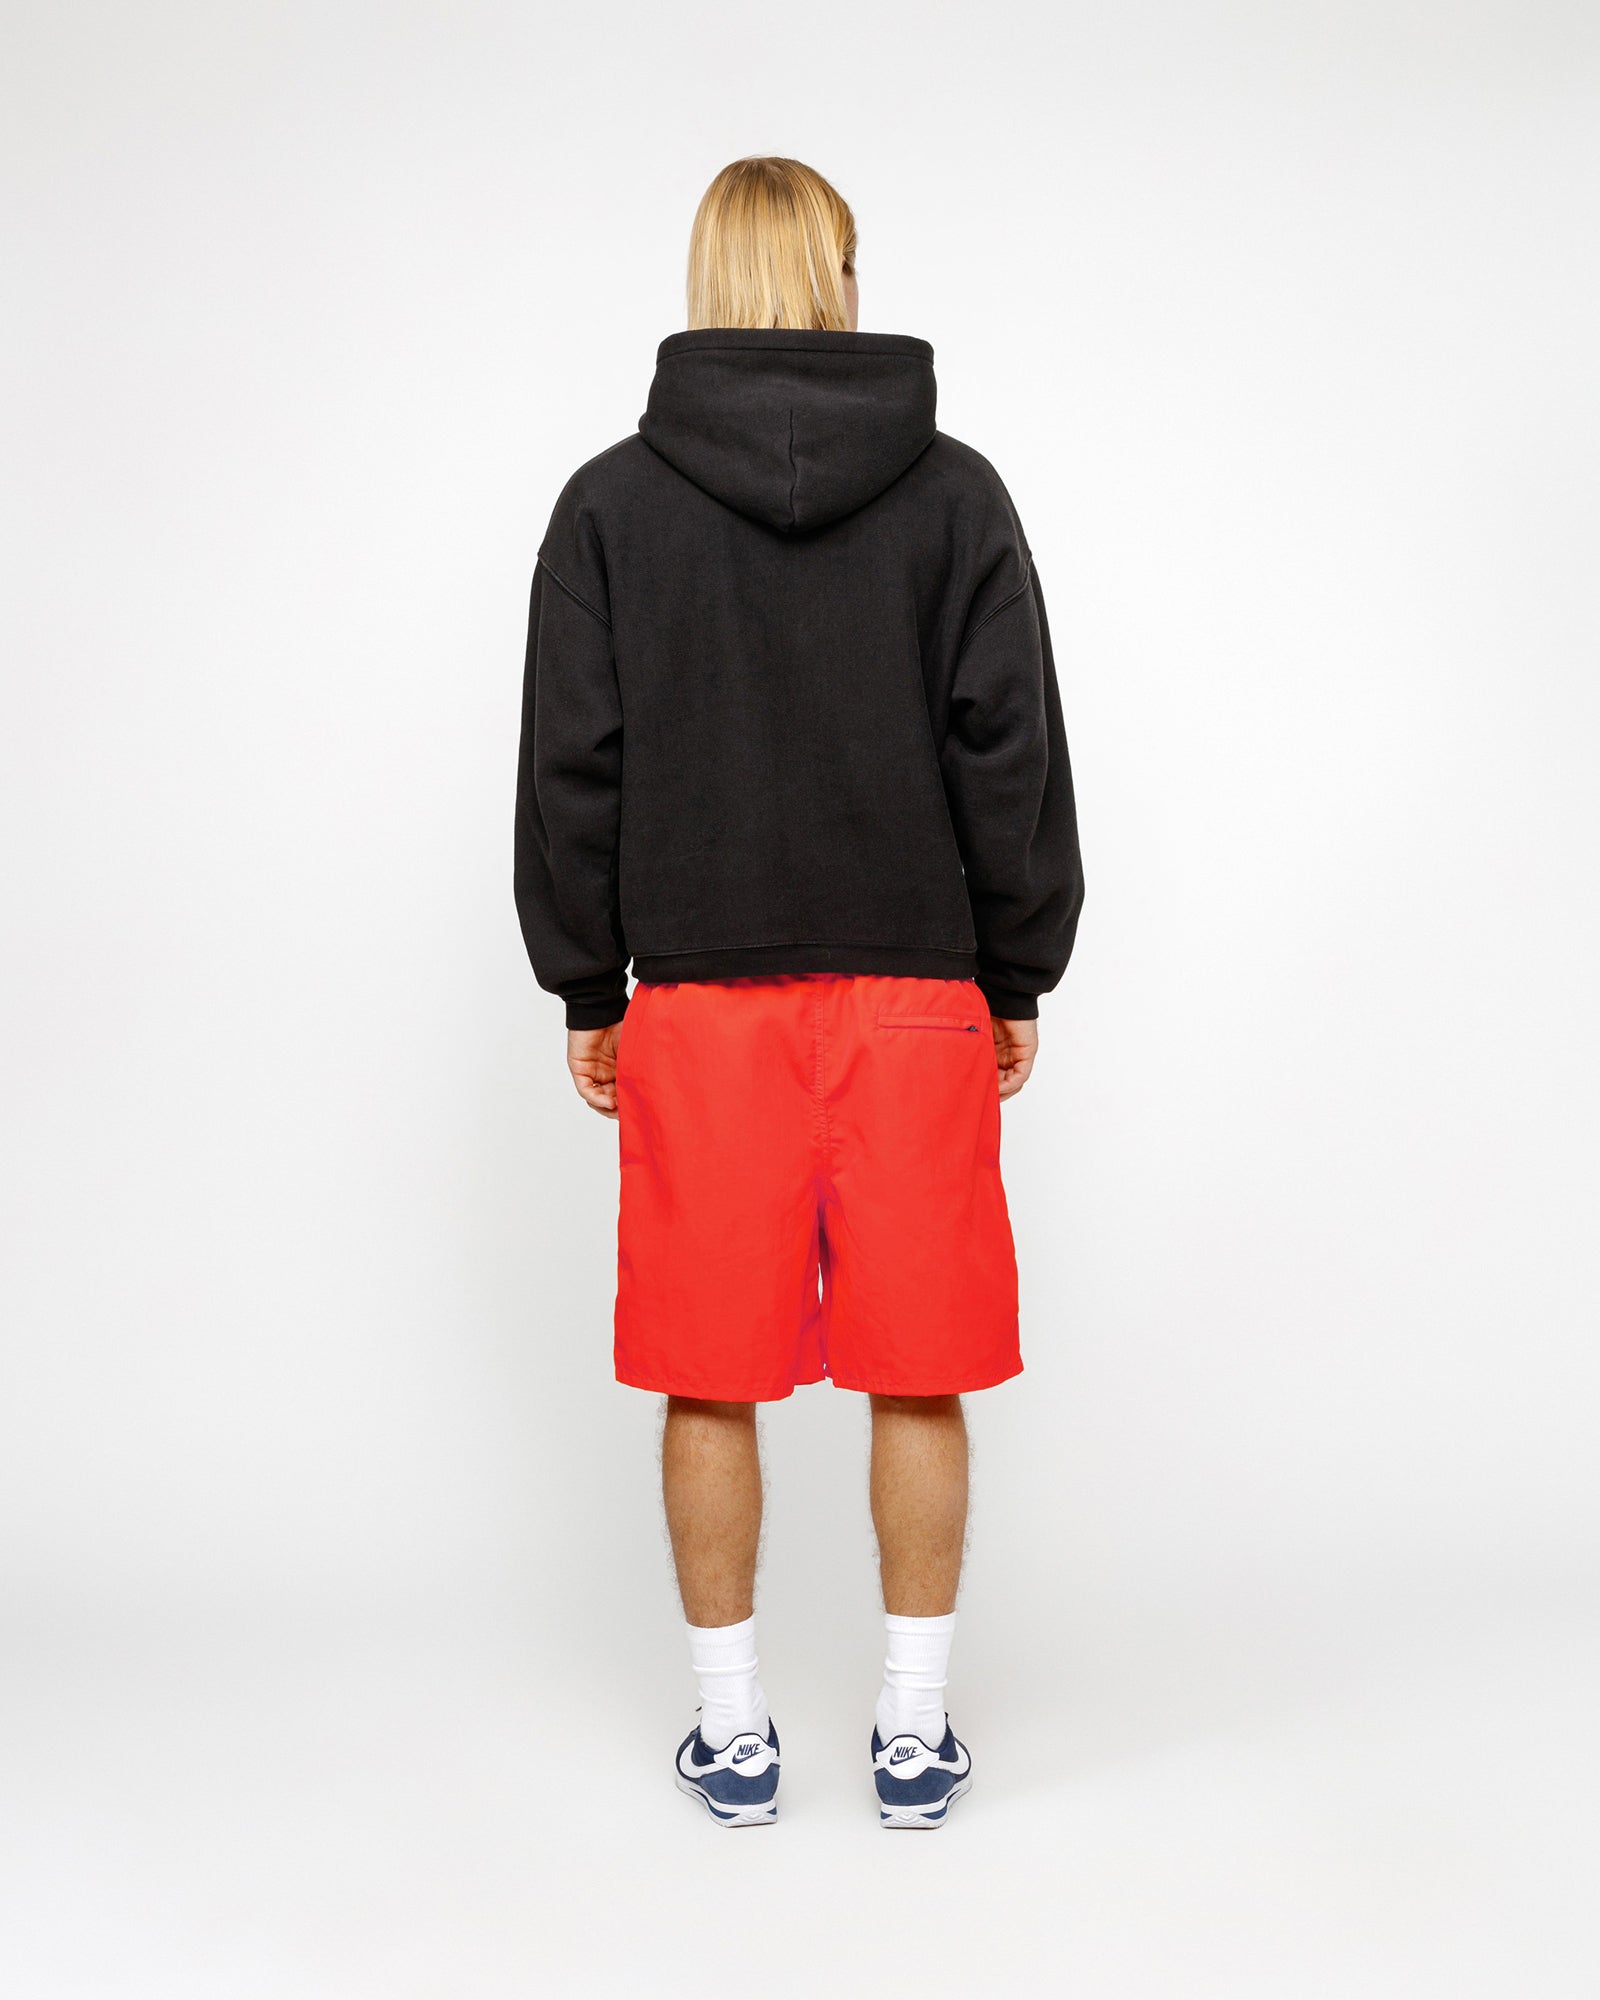 STUSSY WATER SHORT STOCK BRIGHT RED BOTTOMS